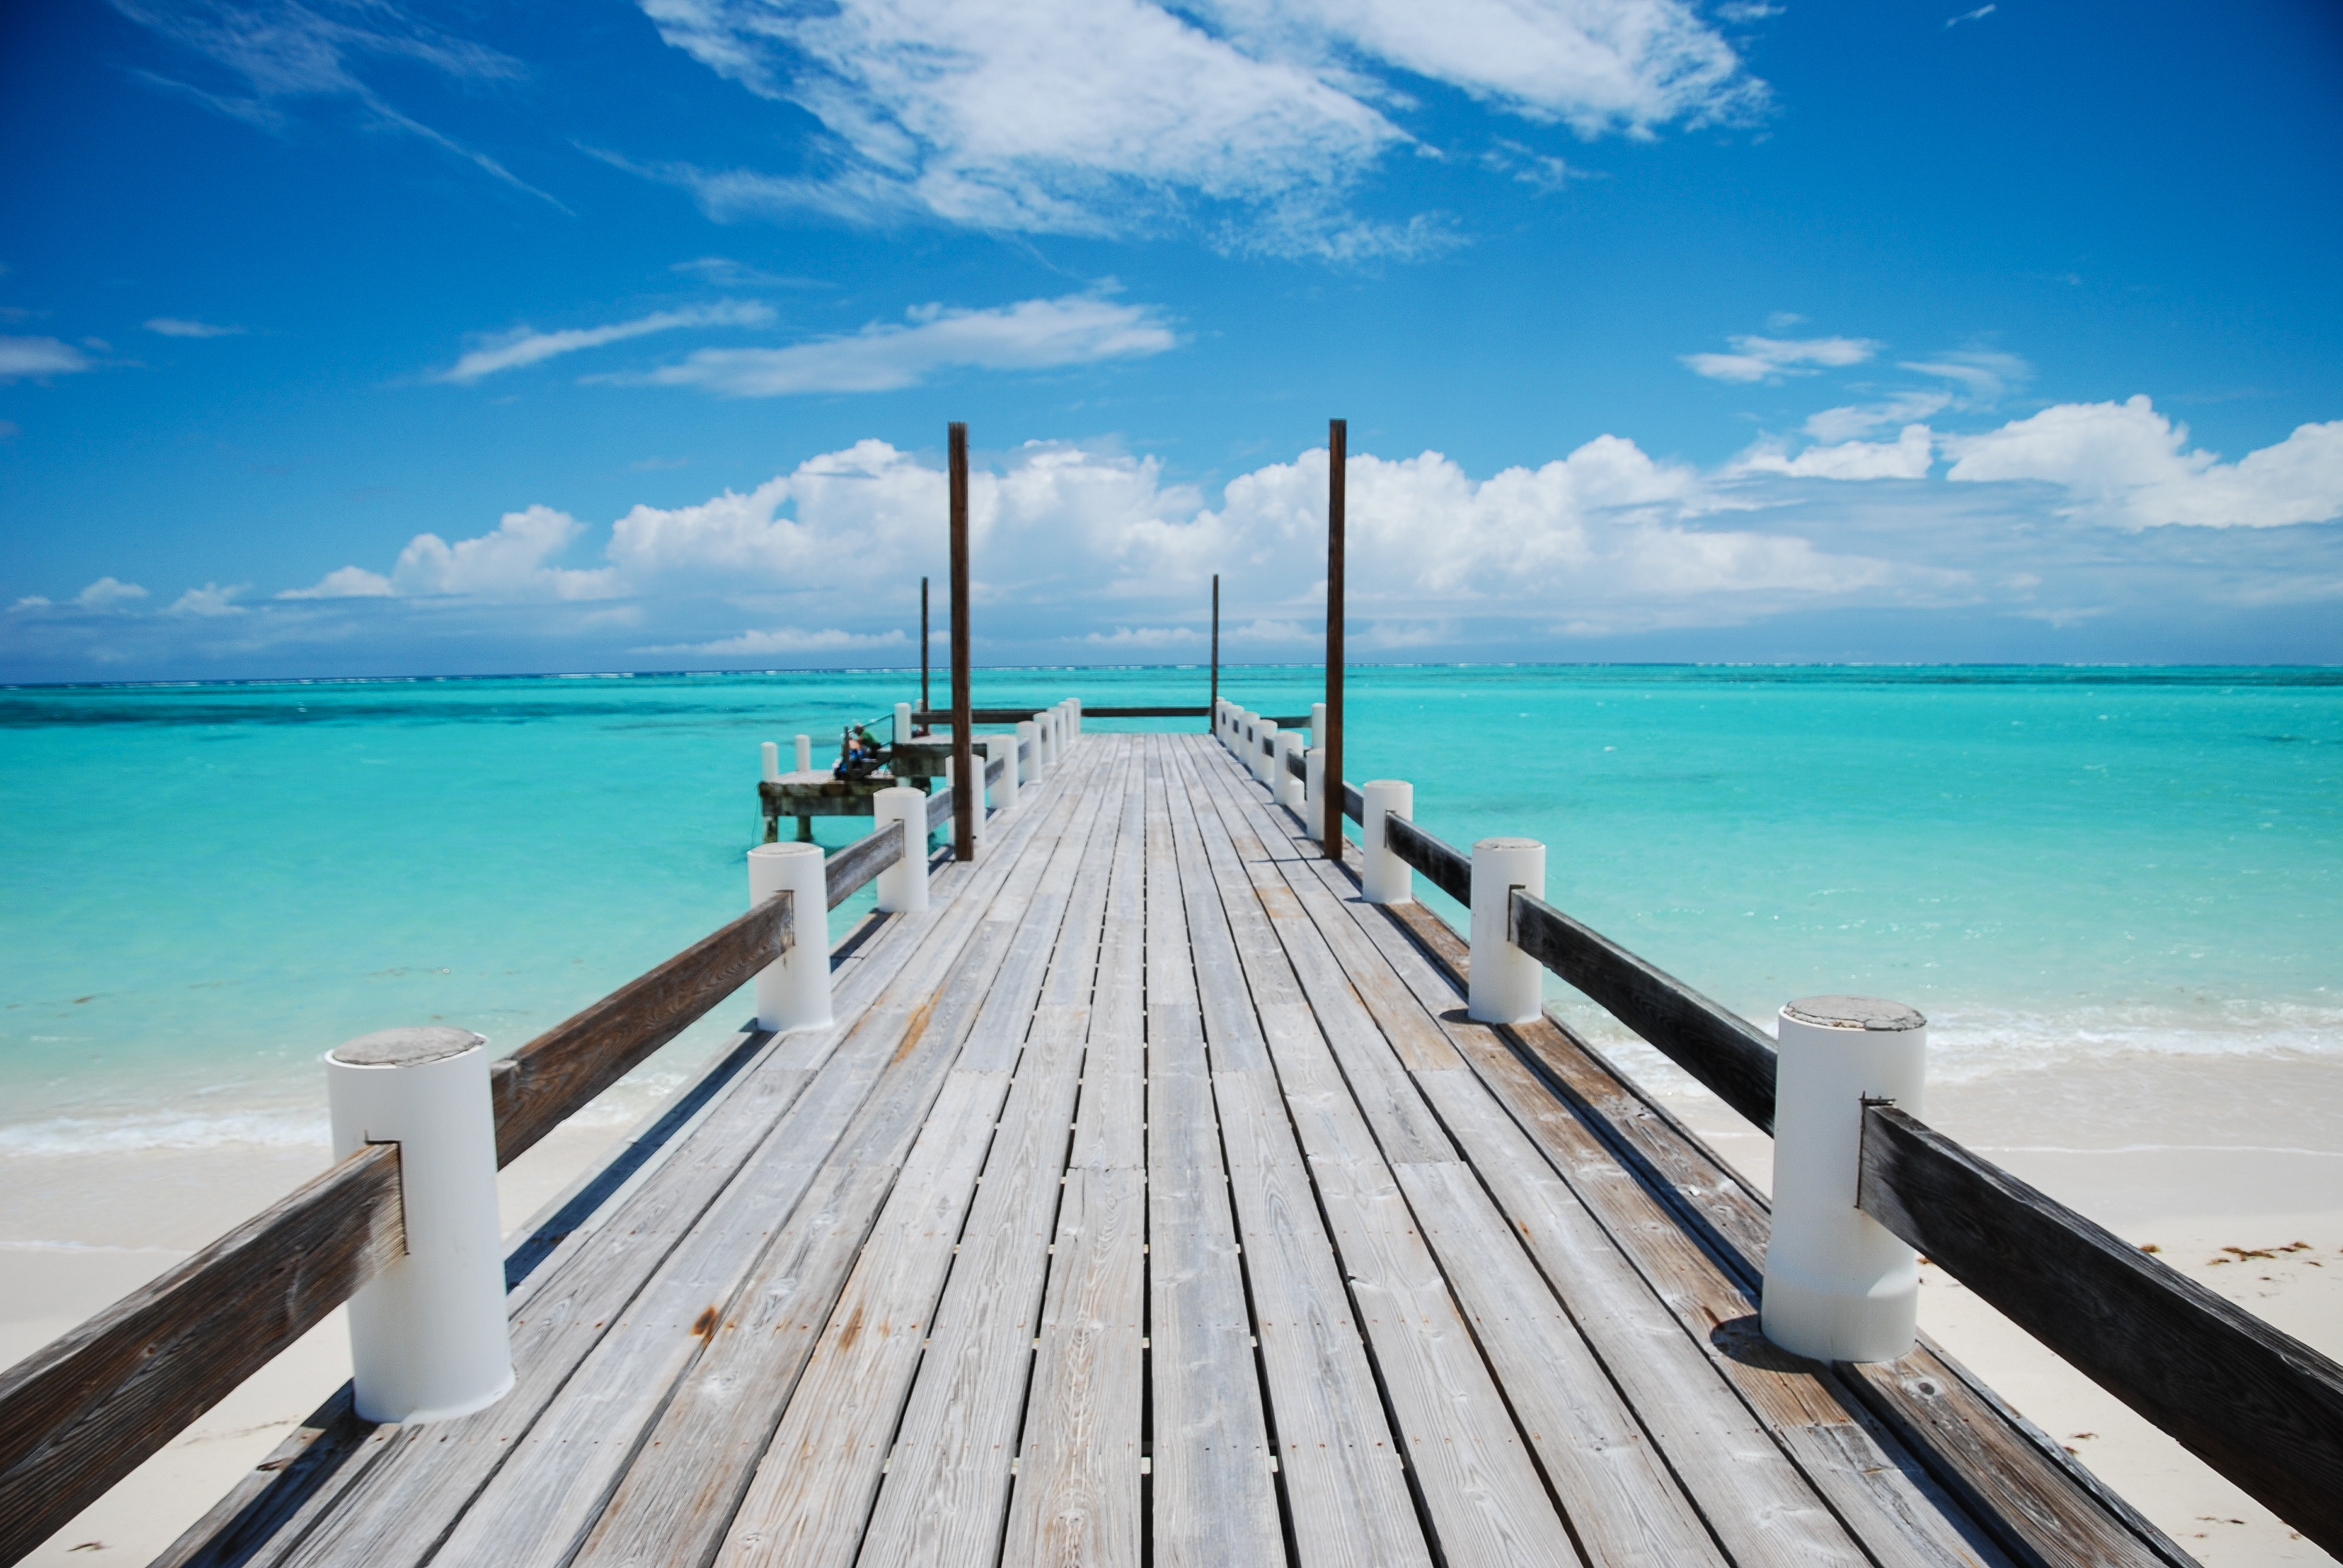 Flights to Turks & Caicos in the $300s round-trip!